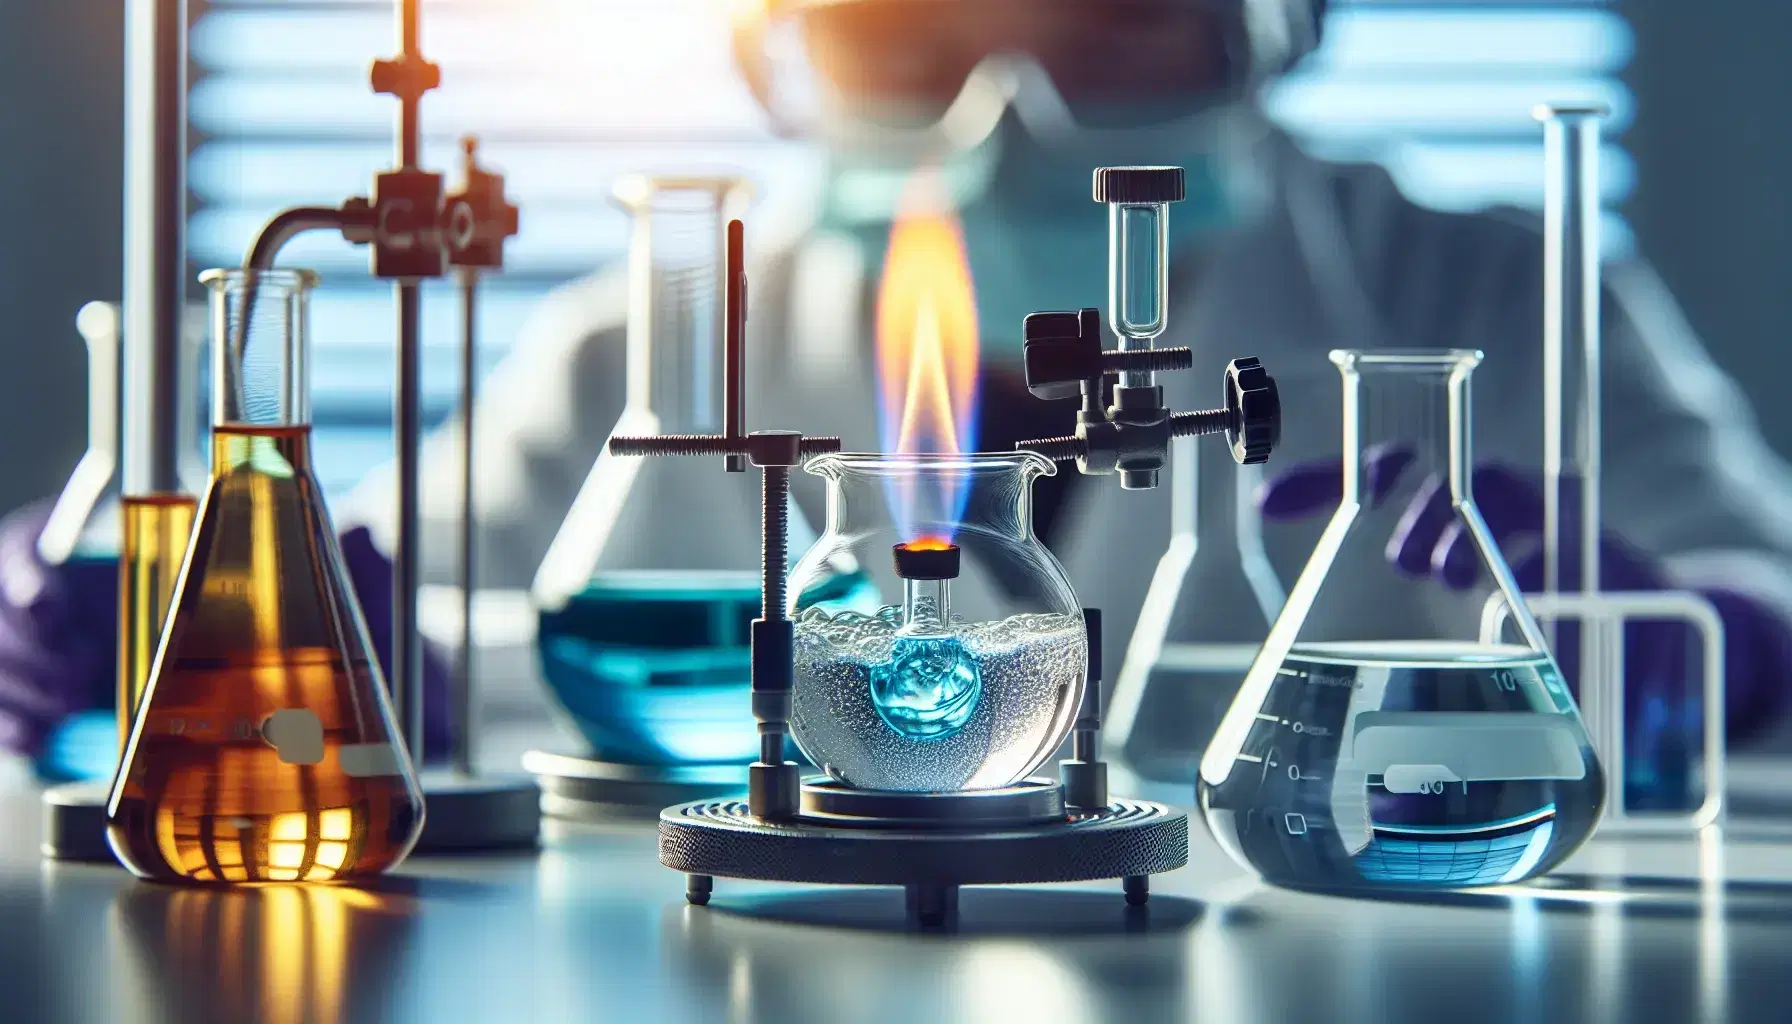 Laboratory with beakers over blue Bunsen flame and visible chemical reaction, safety glasses and nitrile gloves, bottles and substances on shelves.